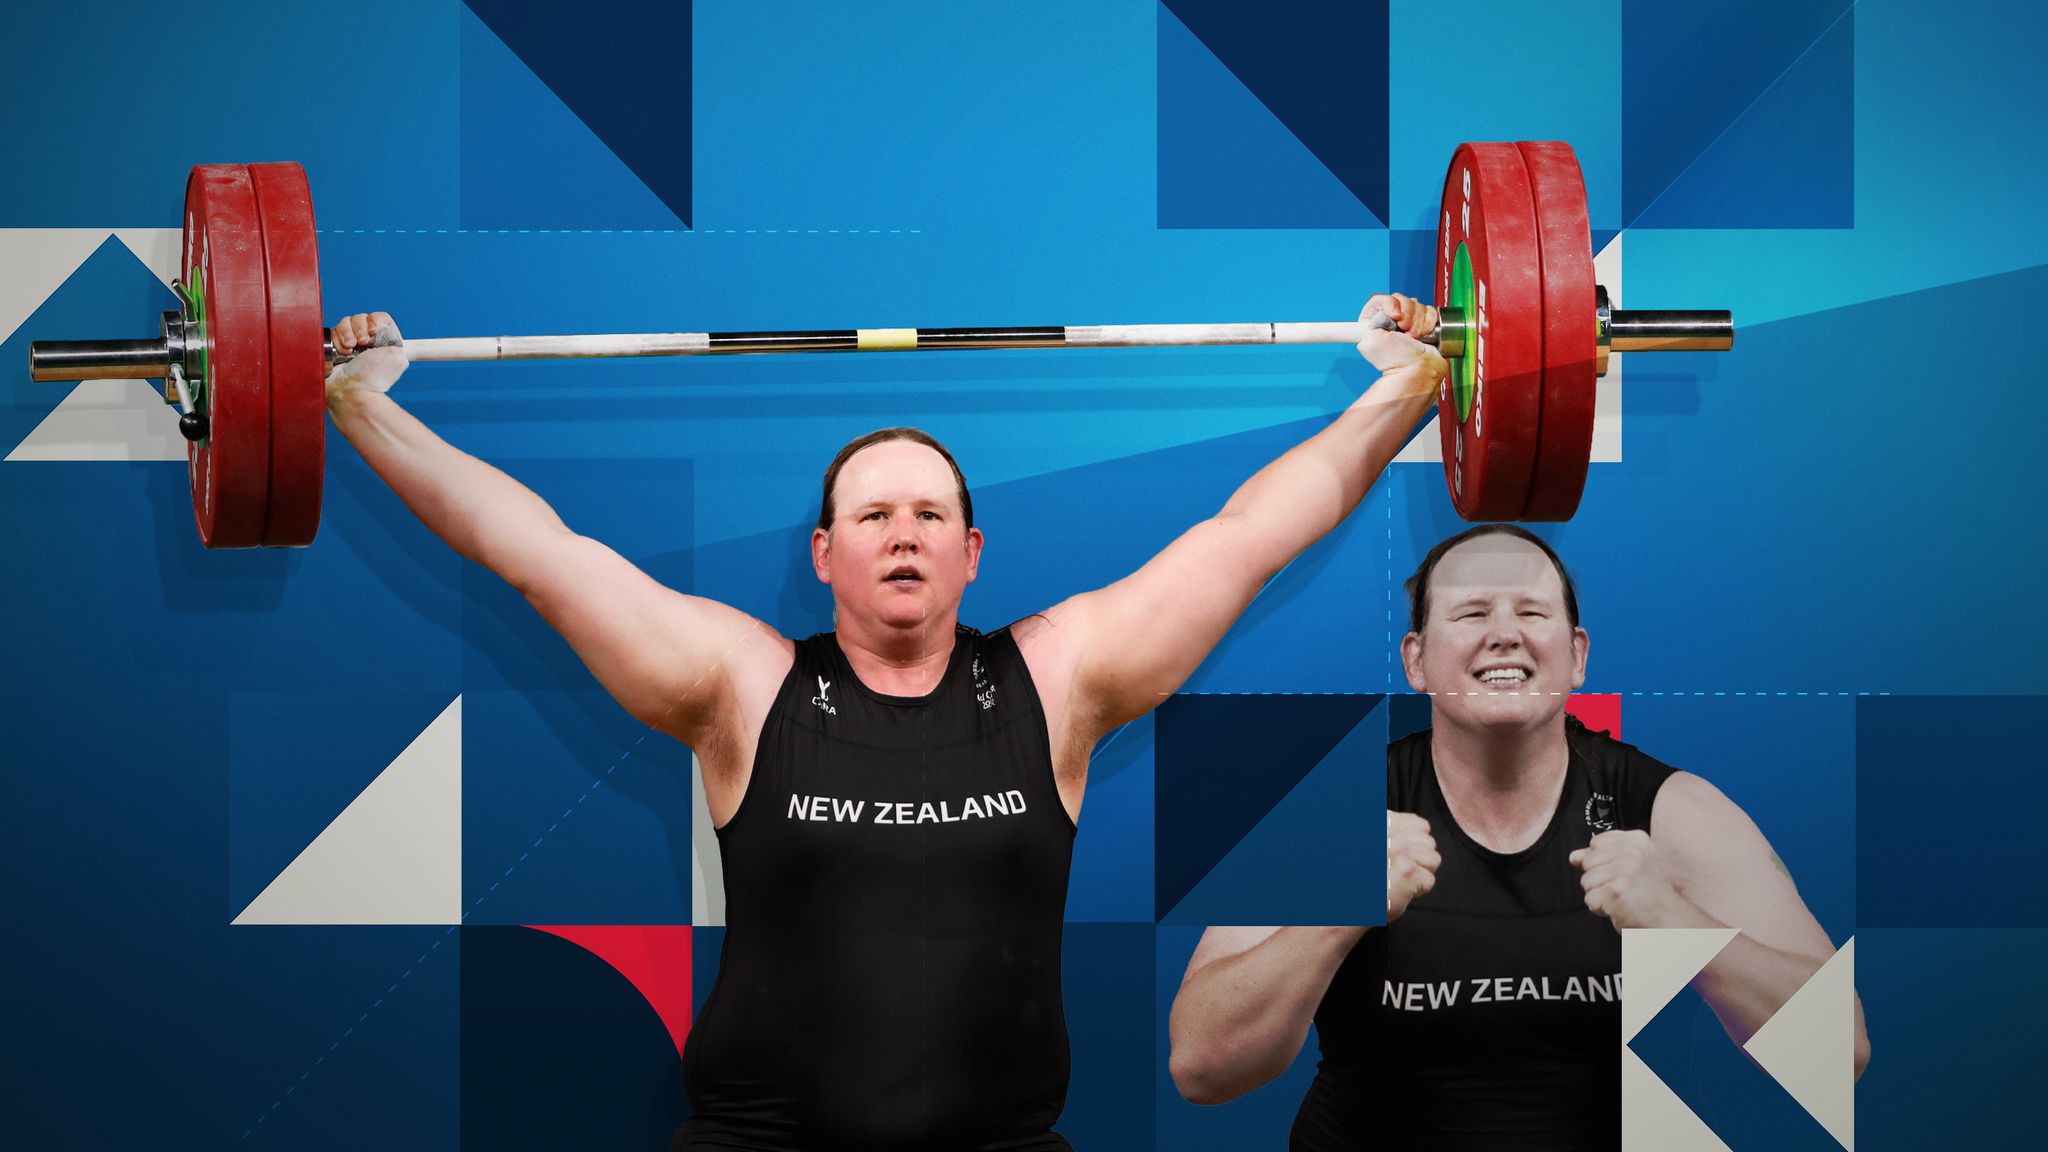 Laurel Hubbard Transgender weightlifter is set to compete in womens event at Tokyo Olympics